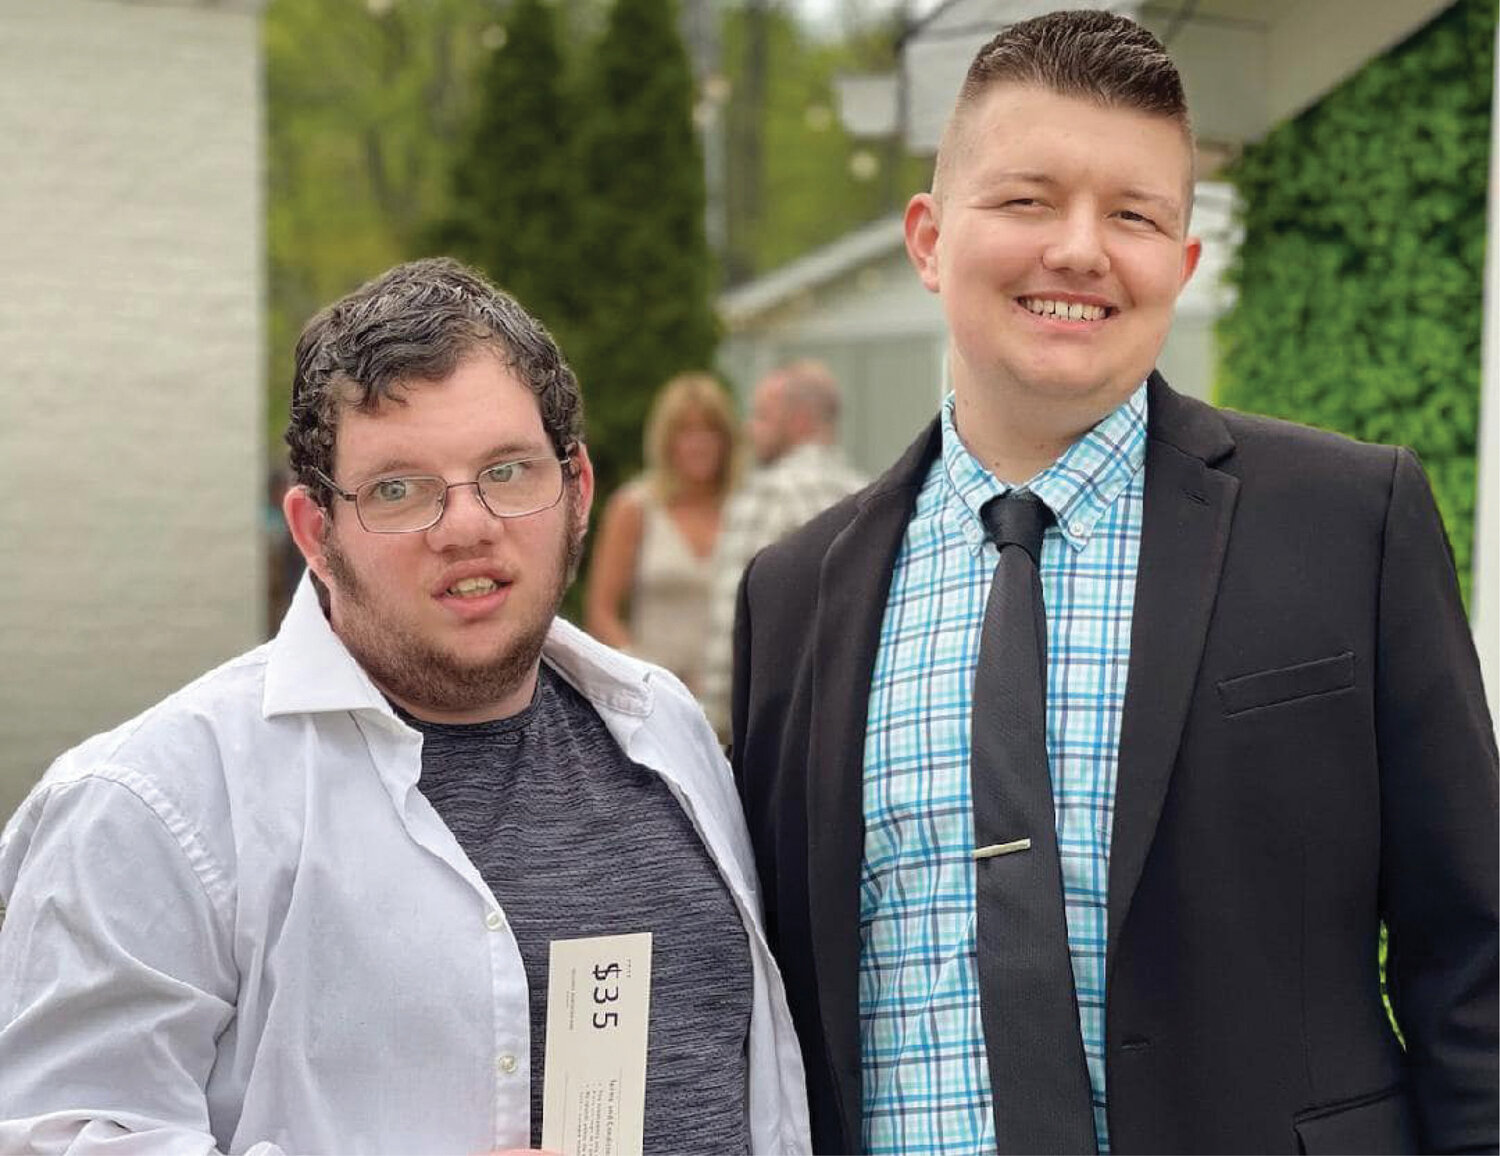 L-R: Jeremy Parrish and Lucas Haston are excited about attending the YMCA fundraising banquet. Thanks to the philanthropy of Bill Johnson and his family, as well as other donors, Jeremy and Lucas are provided with the opportunities to participate in several programs at the Y.